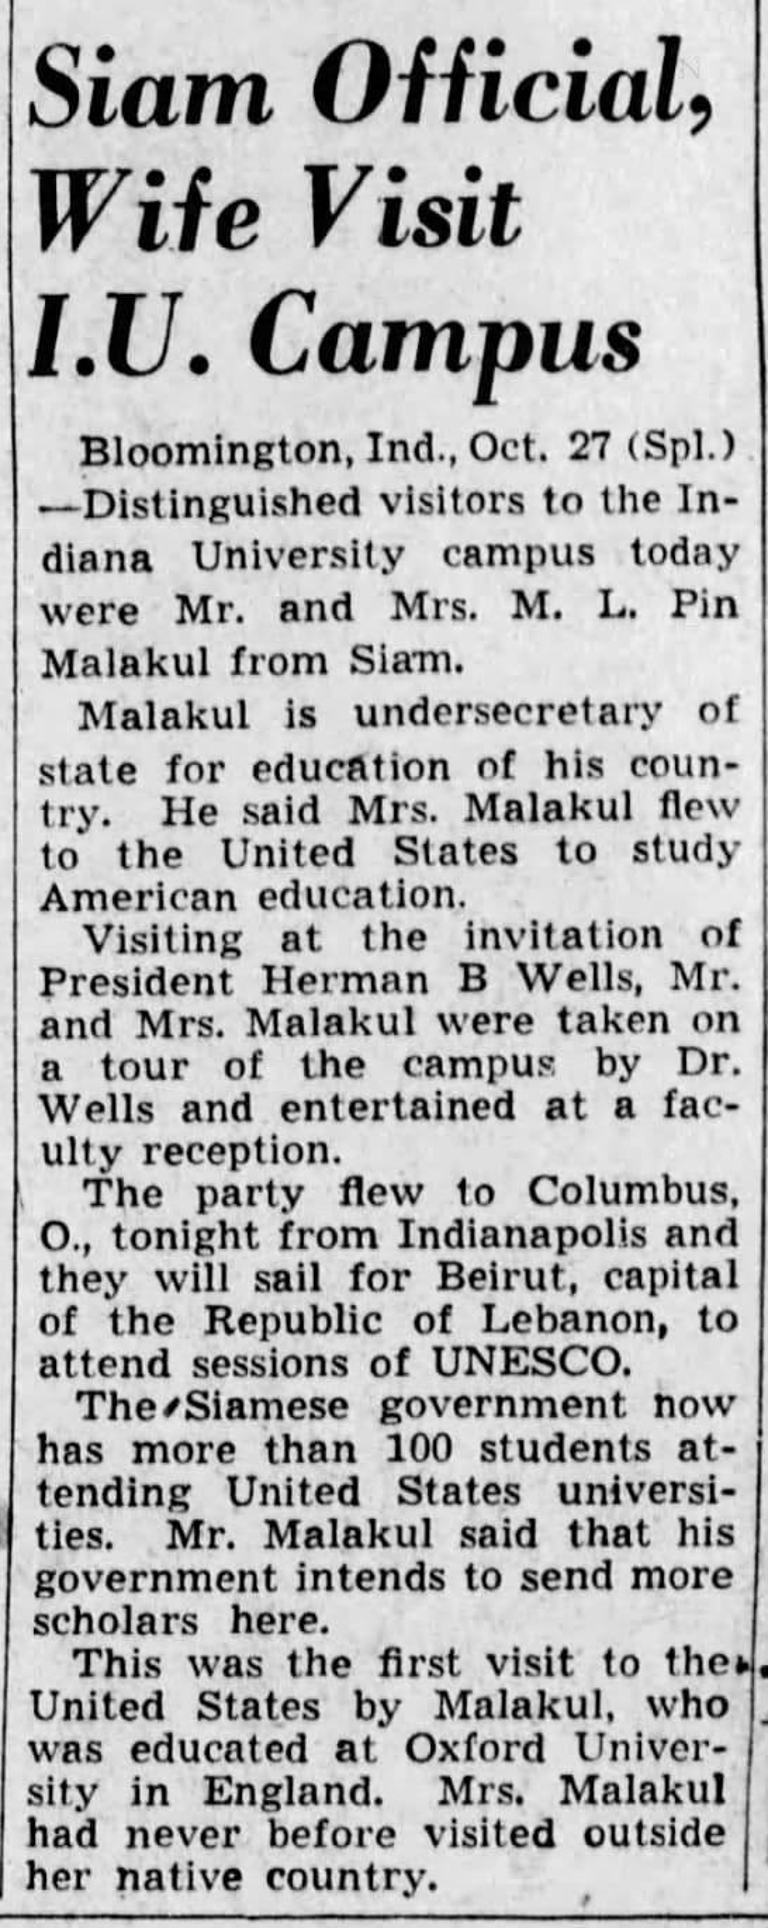 A news clipping announcing an IU visit from M. L. Pin Malakul